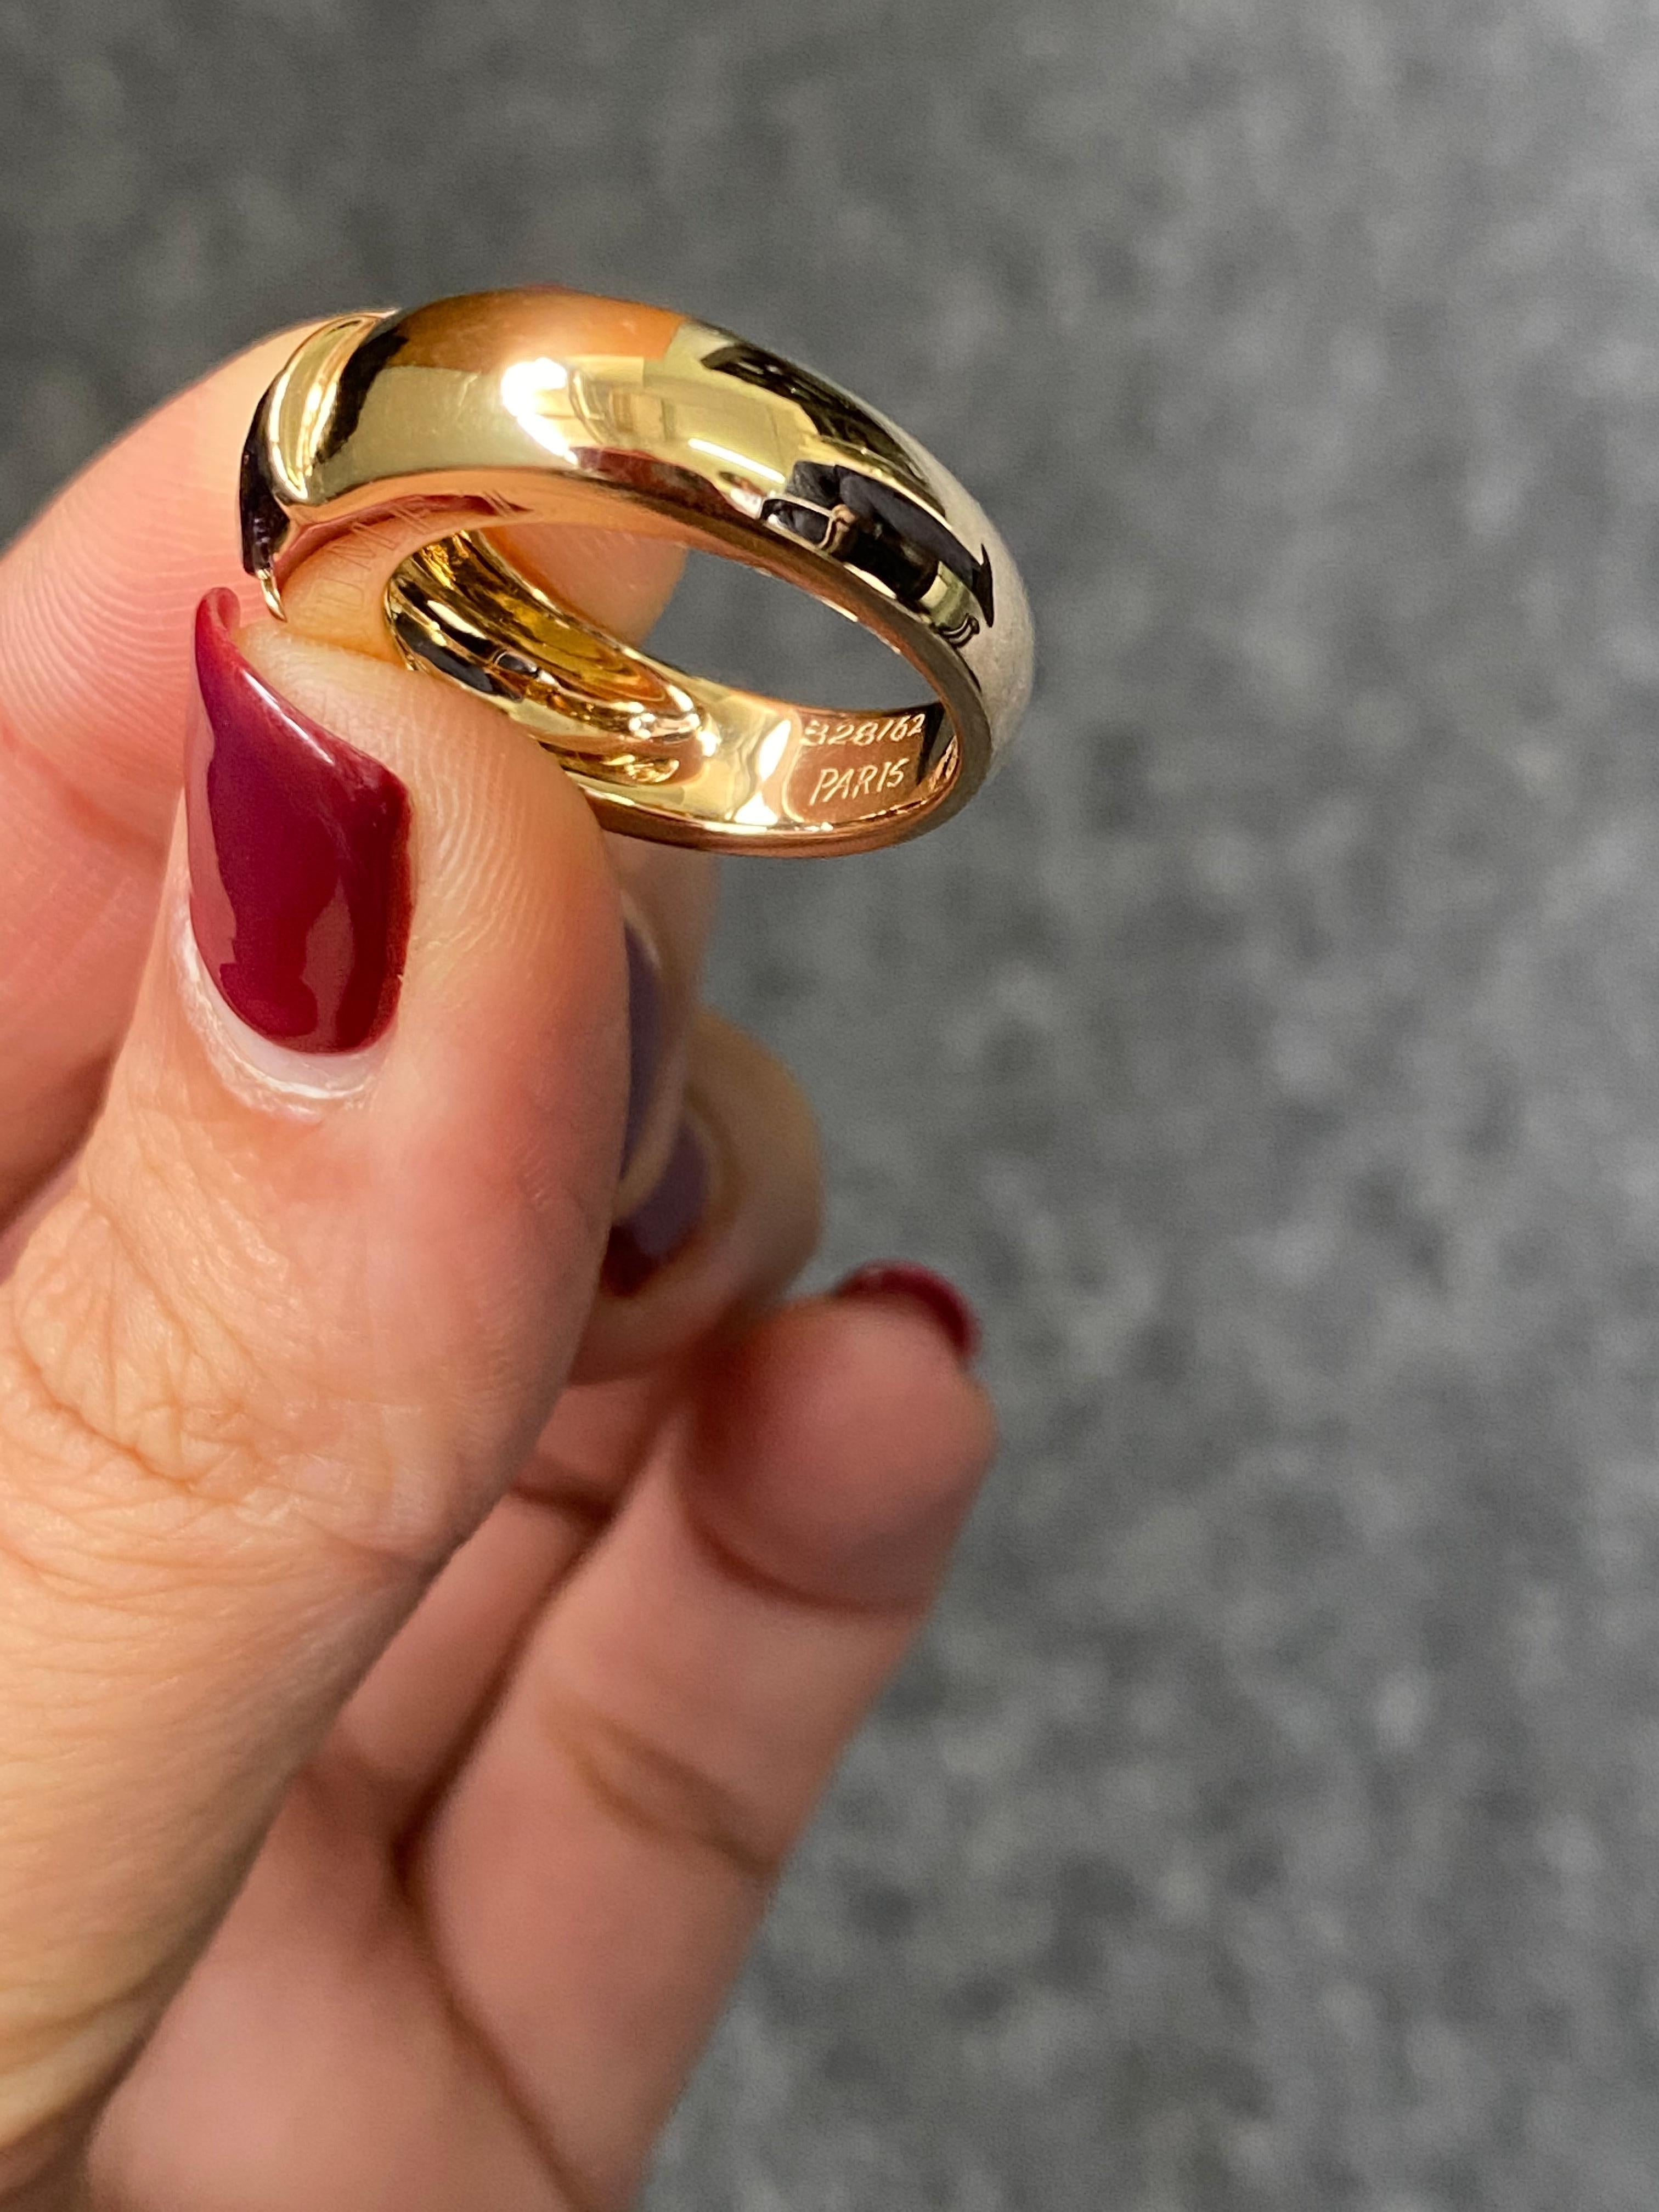 Signed Chaumet band ring, with Iolite set in 18K yellow gold. The ring is sized at US 6. 
Pre-owned.
Message for more information/video. 
Free shipping provided. 
We accept returns. 